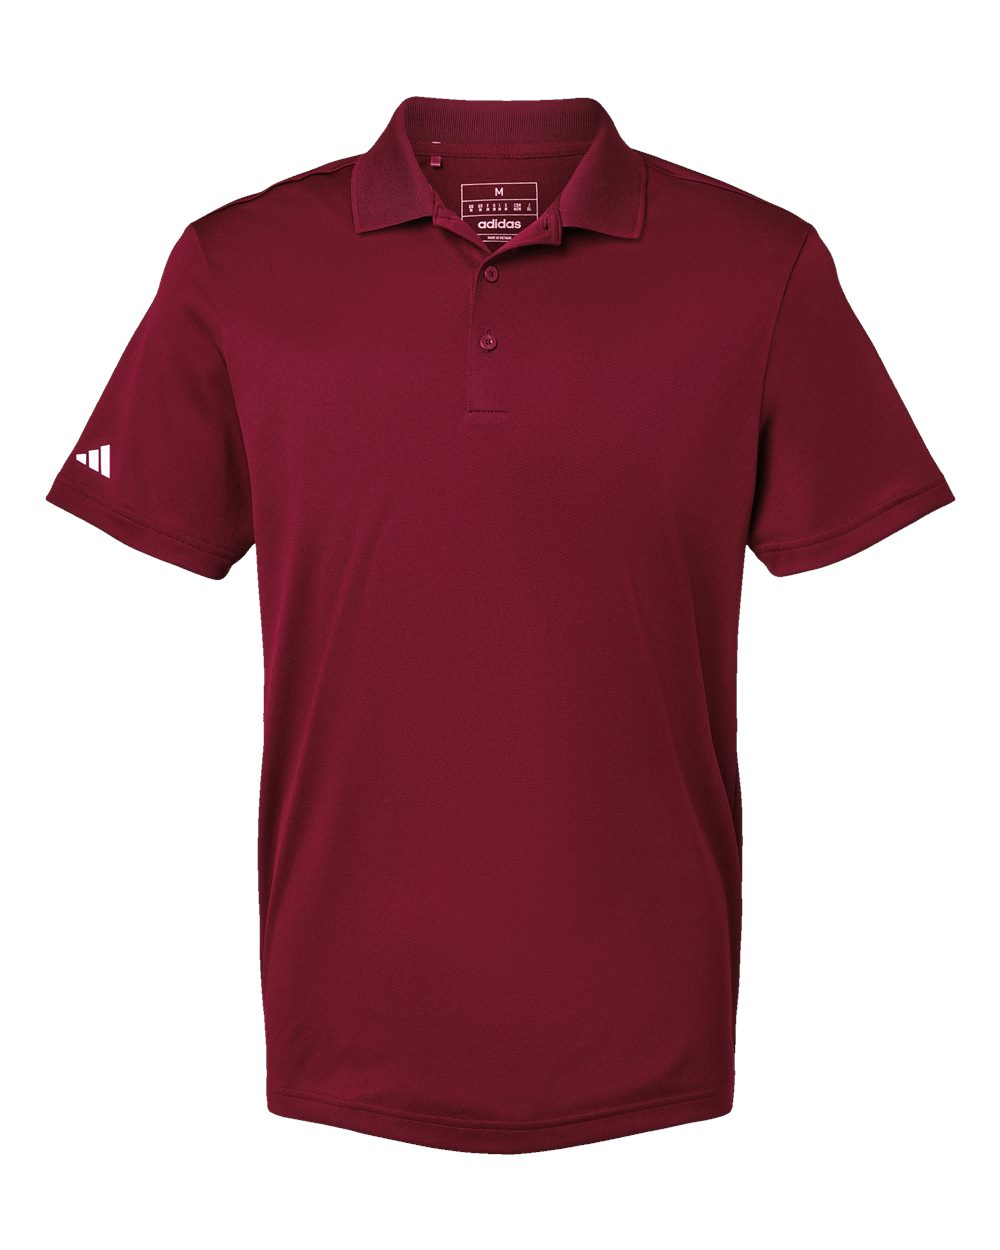 click to view Collegiate Burgundy